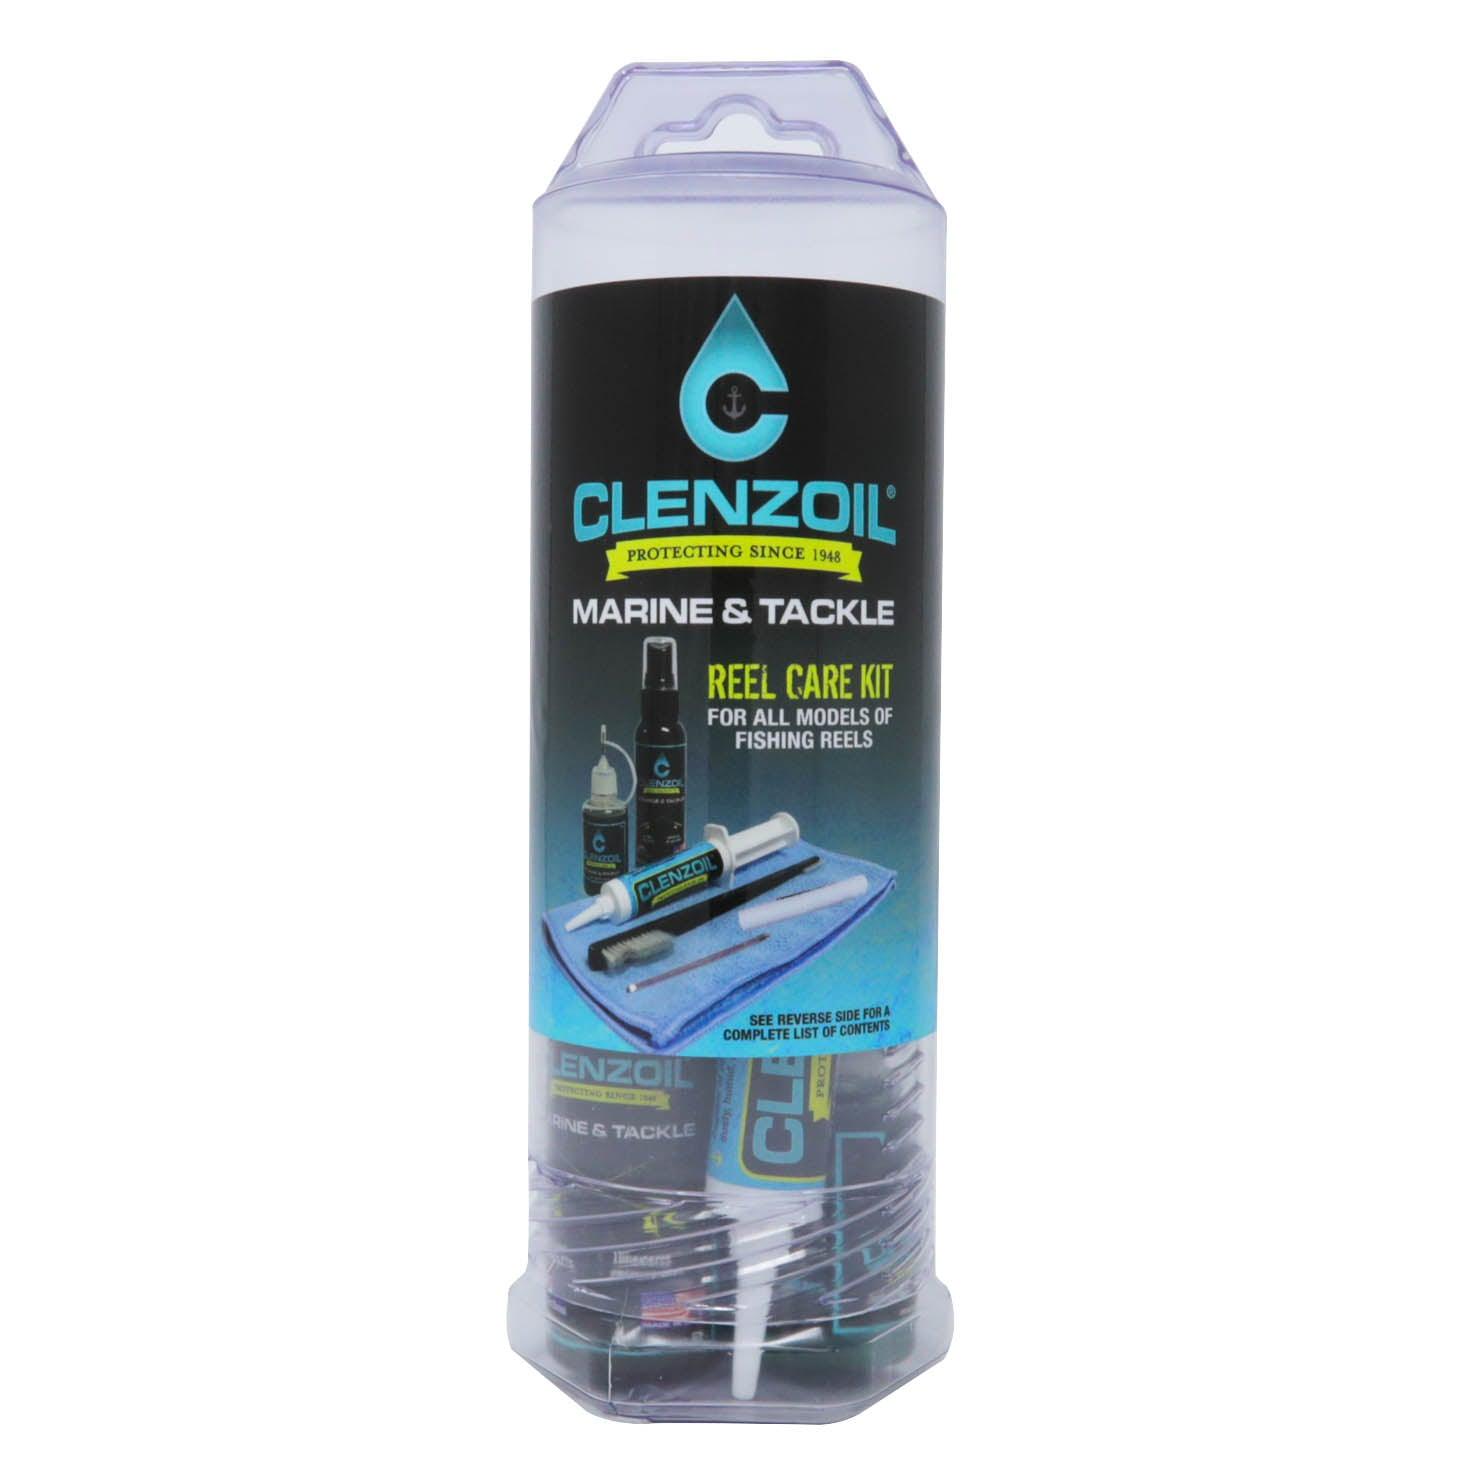 Marine & Tackle Reel Care Kit - Clenzoil Unlimited